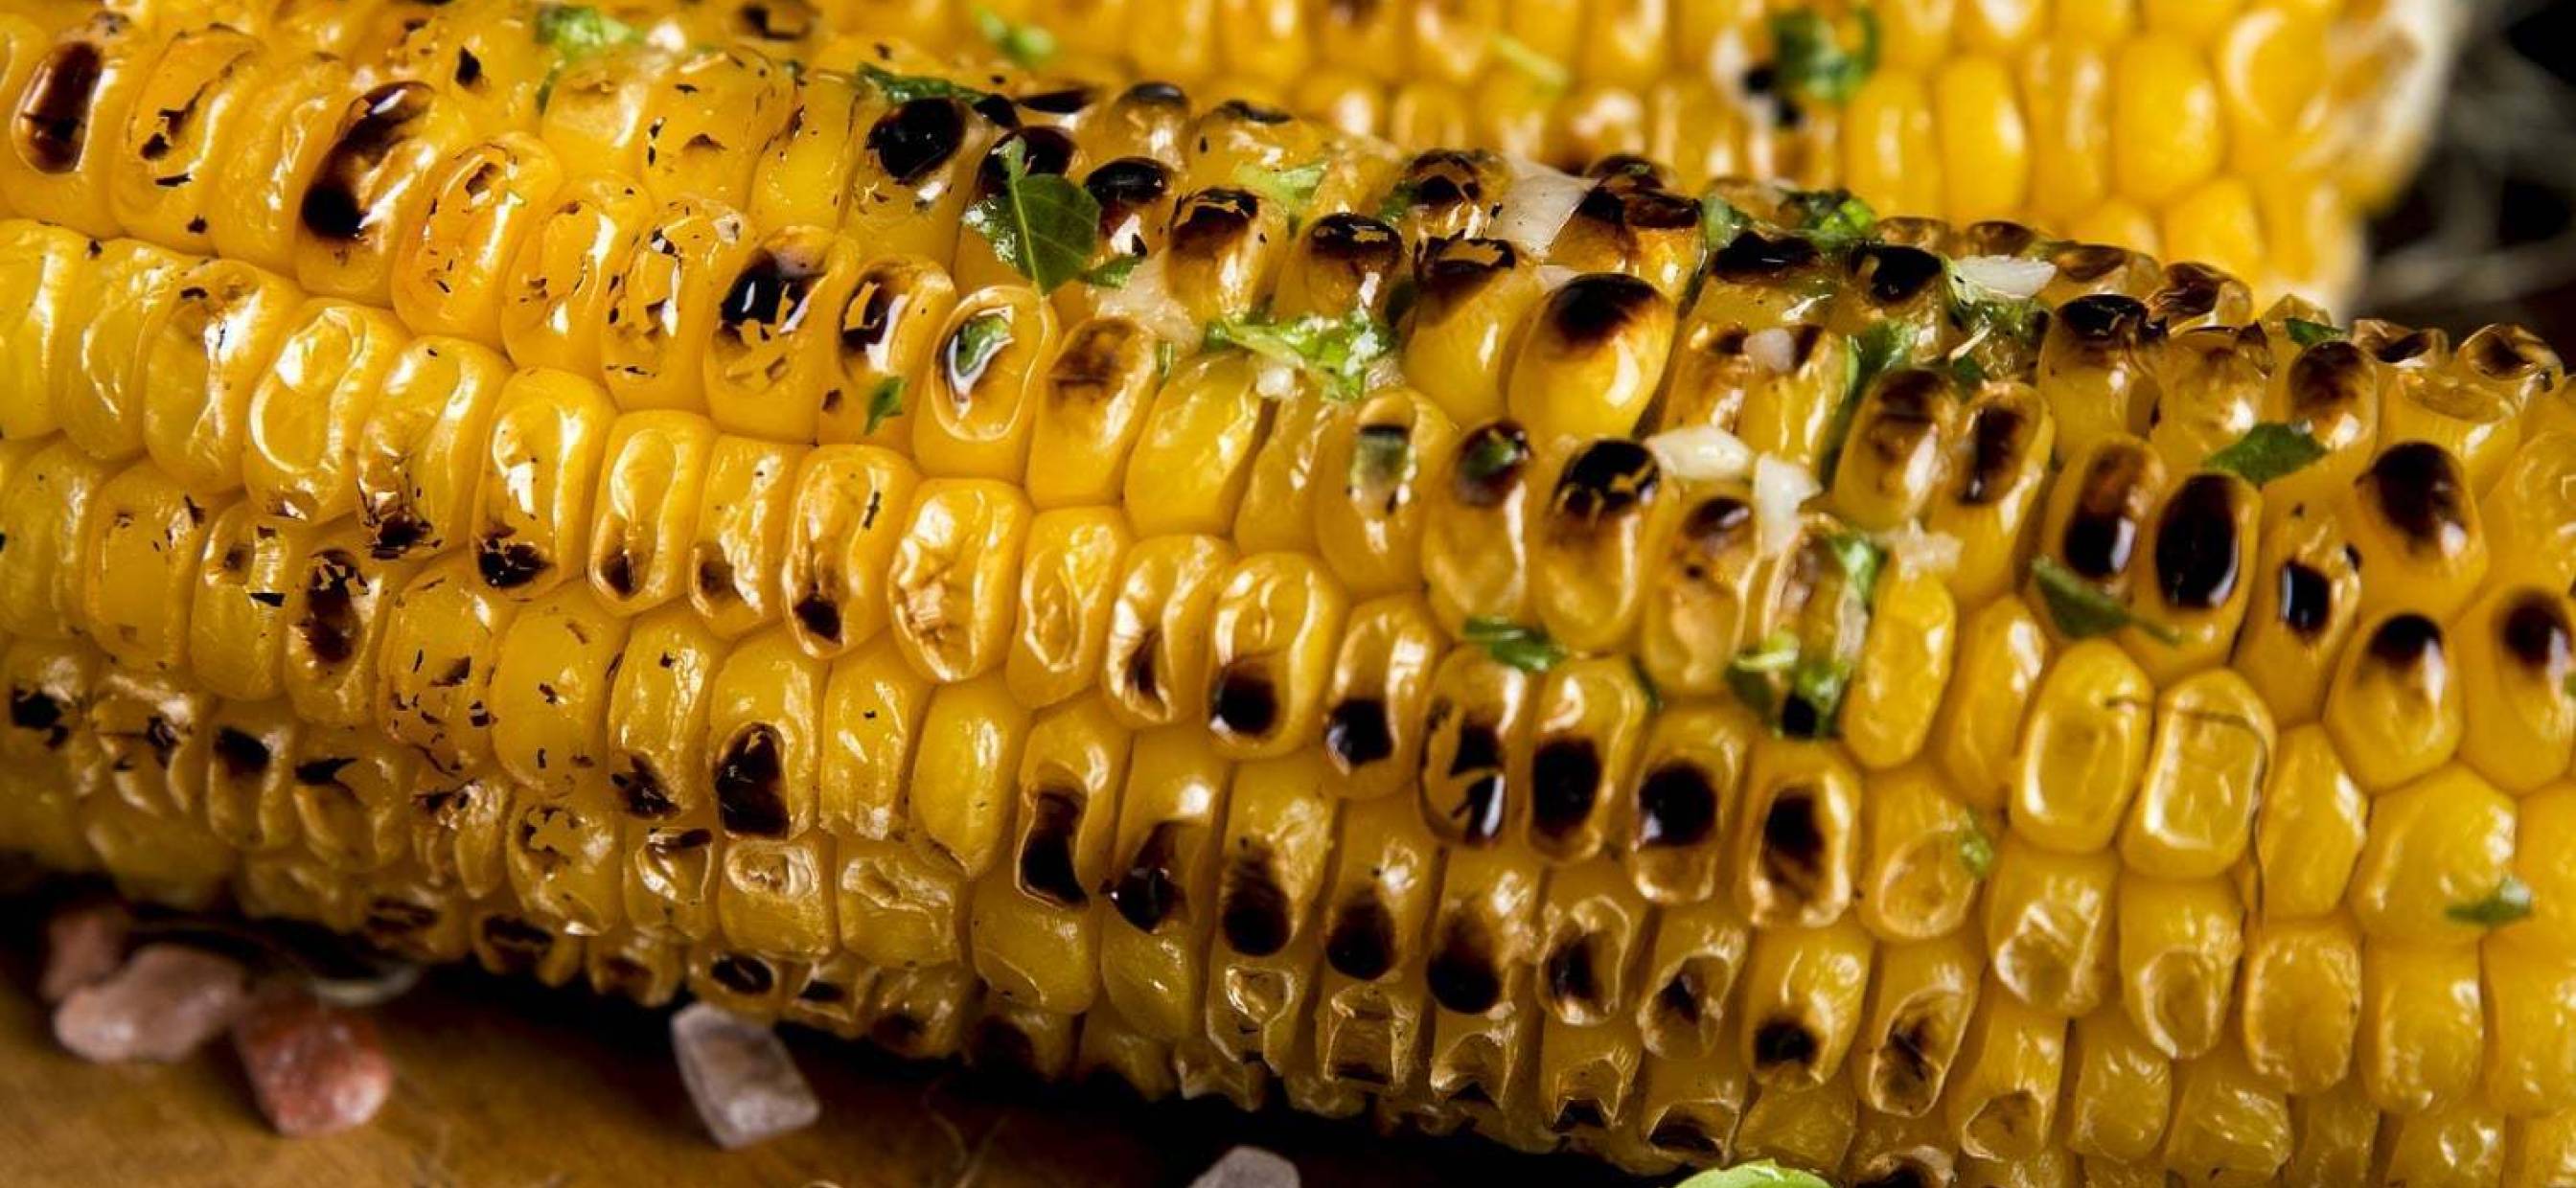 Corn: the Crop That Shaped the New World